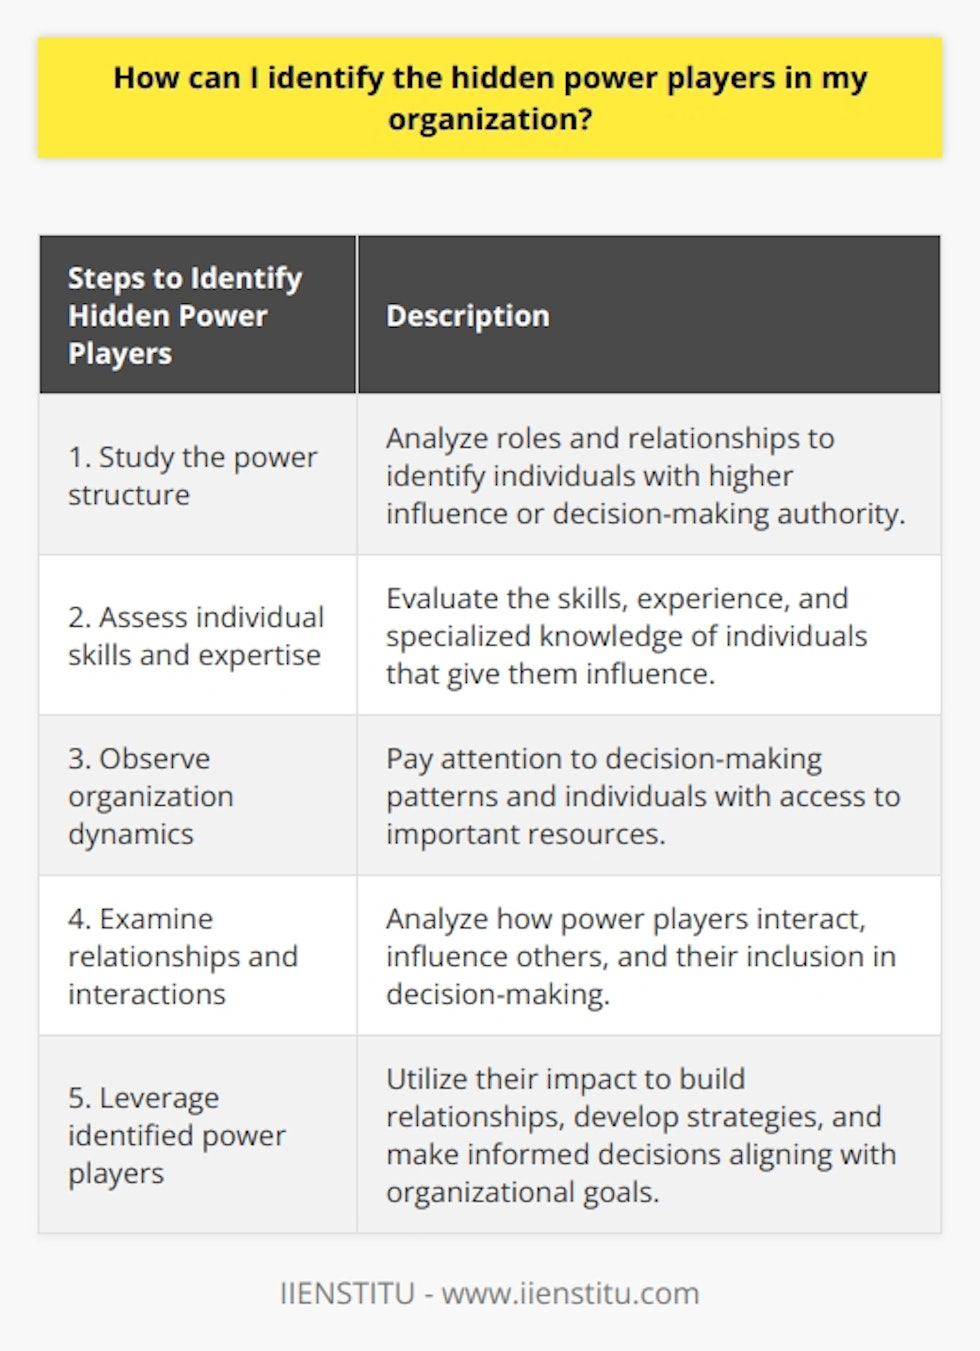 Identifying the hidden power players in an organization is crucial for any successful business. These individuals have a significant influence over decision-making and understanding their dynamics can lead to better strategies and outcomes. Here are some practical steps to identify these power players:1. Study the power structure: To identify the power players, it is necessary to understand the participants in the decision-making process. Analyze the roles and responsibilities of individuals and the relationships between them. This will help in identifying those who have a higher level of influence or decision-making authority.2. Assess individual skills and expertise: Evaluate the skills, experience, and expertise of individuals in the organization. Look for those who have a track record of success or possess specialized knowledge that gives them influence. Additionally, consider political understanding and the ability to navigate the decision-making process to their advantage.3. Observe organization dynamics: Pay close attention to how decisions are made in the organization. Look for patterns, such as key individuals who always seem to be involved or have access to important resources. Also, identify individuals who have the authority to make decisions and understand the extent of their influence in the decision-making process.4. Examine relationships and interactions: Analyze how power players interact with each other and the level of influence they have over one another. Look for individuals who are included in decision-making and who can sway the opinions of others. Understanding the interconnected relationships will provide insights into who the power players are.By considering these steps, it becomes possible to identify the hidden power players within an organization. This knowledge can then be leveraged to build relationships, develop strategies, and make informed decisions that align with the organization's goals. Remember that the power players may not always be those in formal leadership positions, but rather individuals with significant influence and impact on the decision-making process.In conclusion, identifying the hidden power players in an organization is crucial for success. By studying the power structure, assessing individual skills, observing organization dynamics, and examining relationships, it becomes possible to identify these influential individuals. Once identified, their impact can be leveraged to drive positive outcomes for the organization.